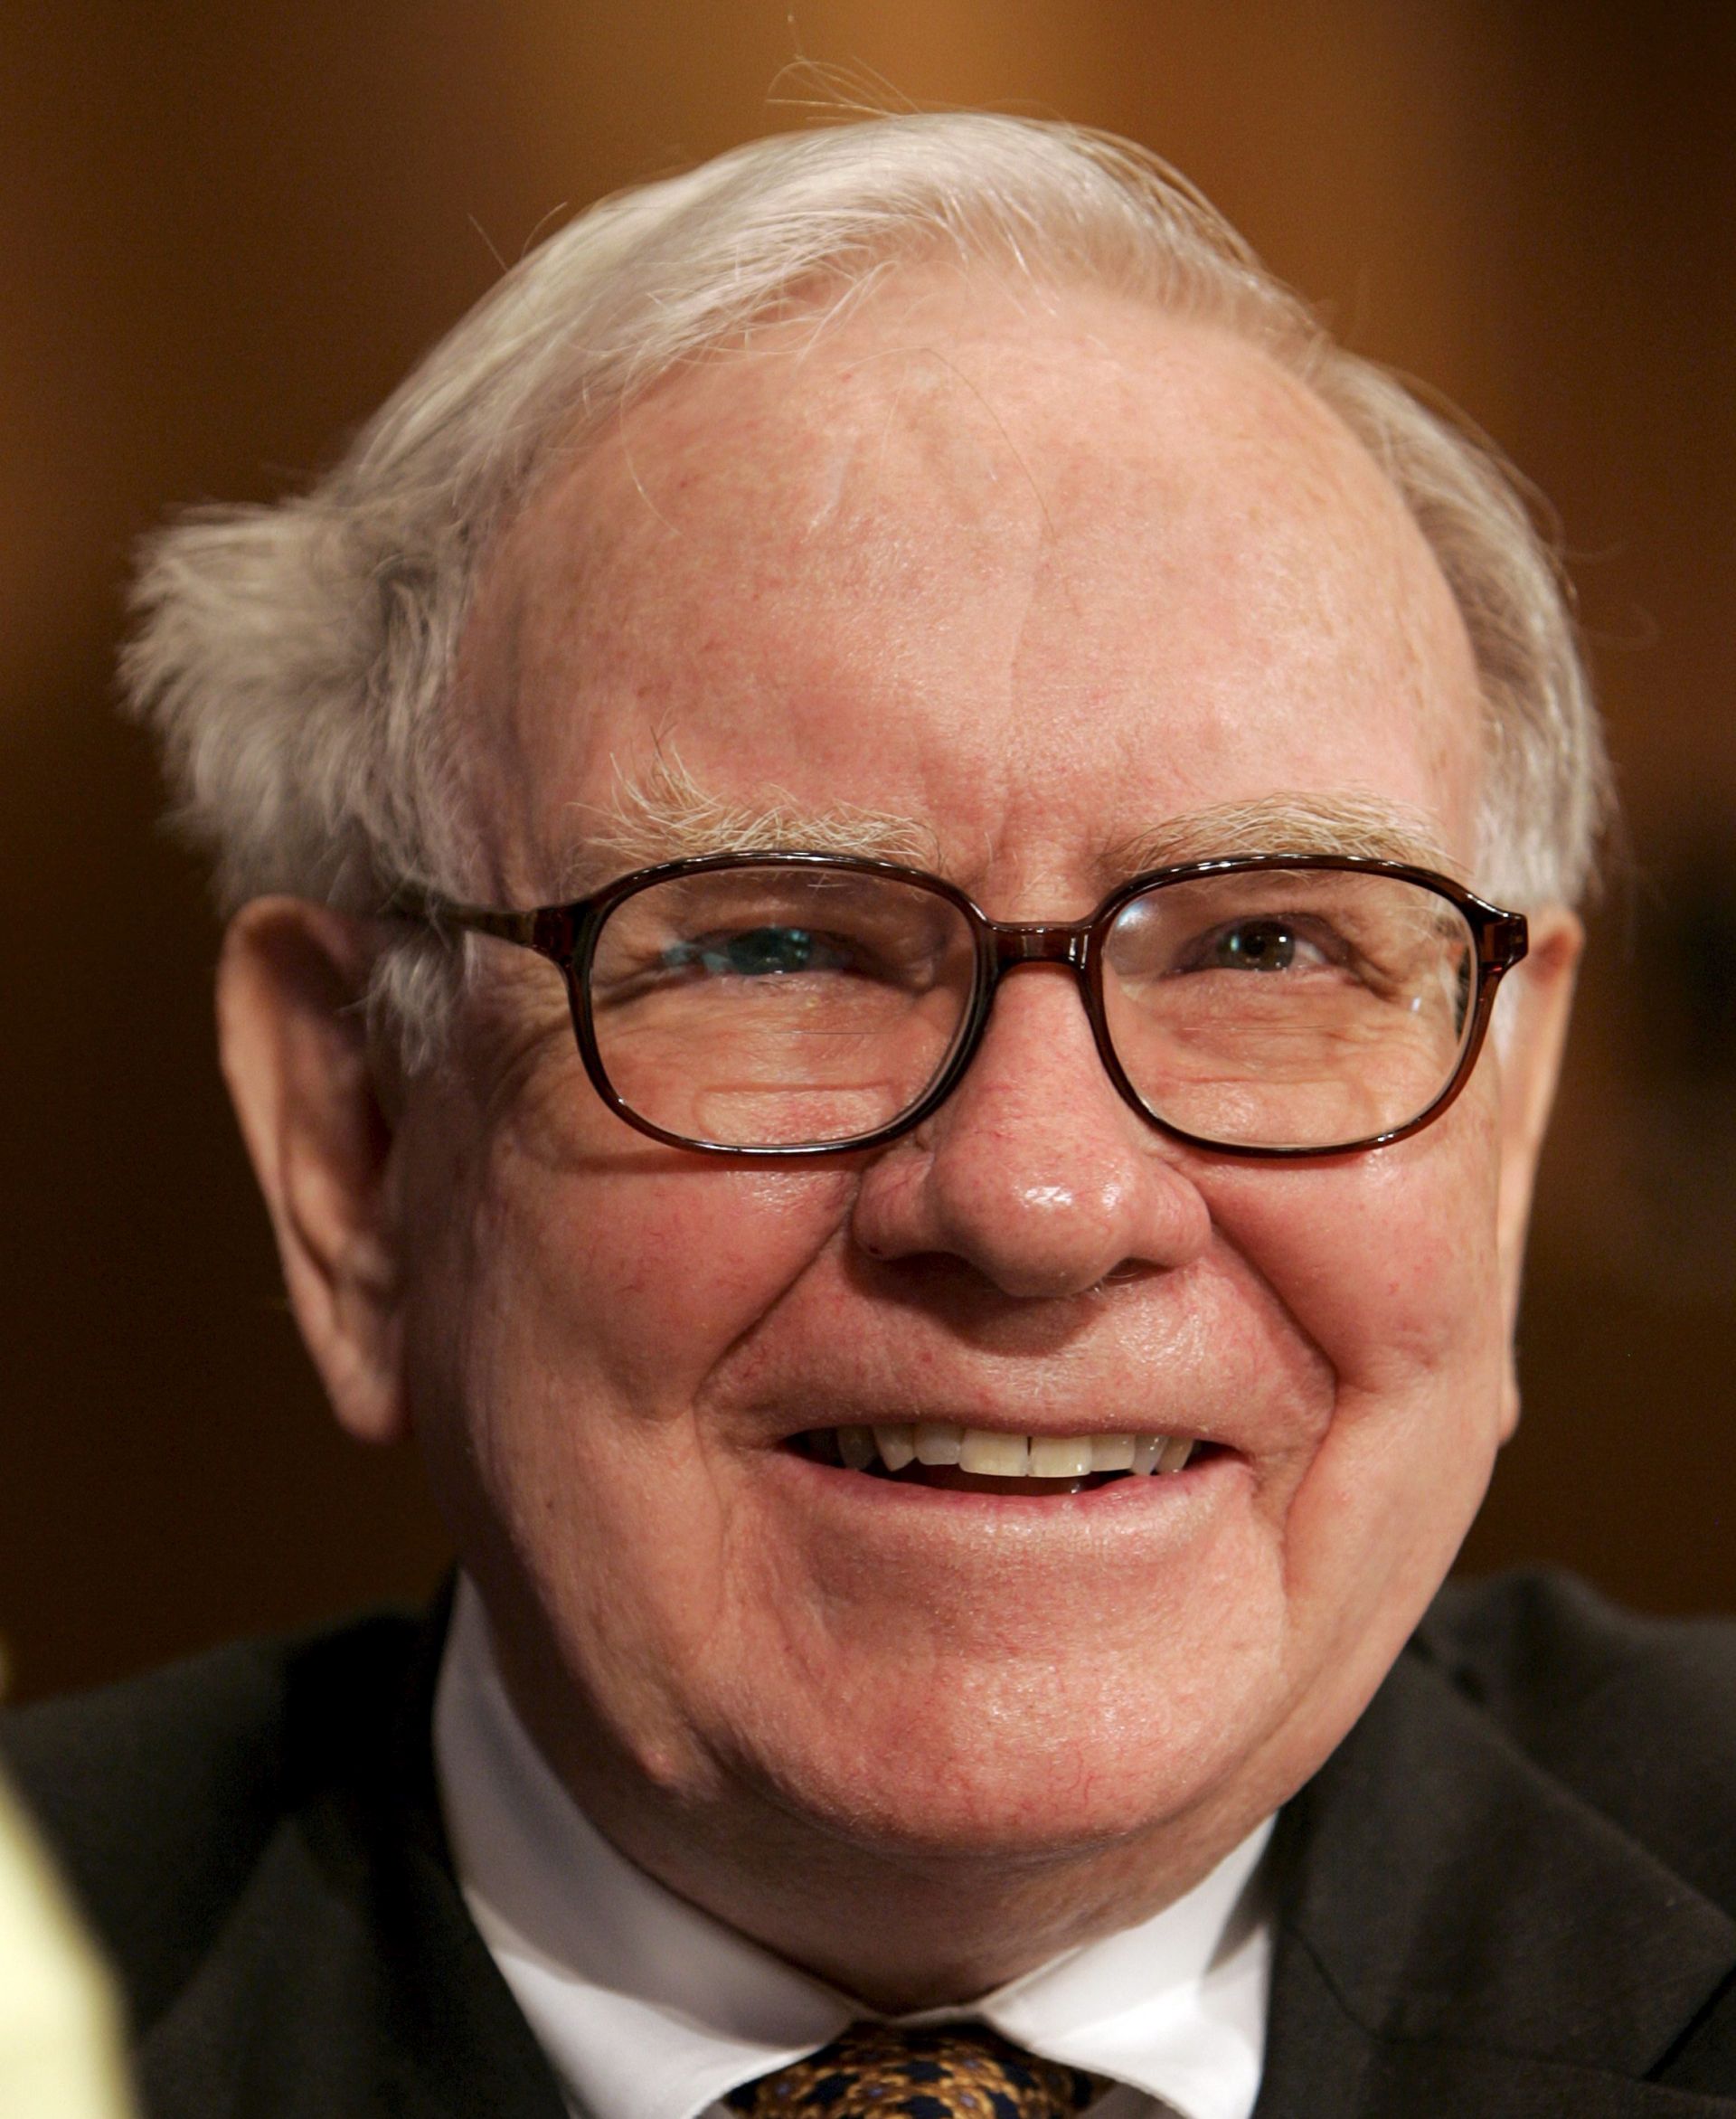 epa04879109 (FILE) A file photo dated 14 November 2007 showing Warren Buffett, chairman and CEO of Berkshire Hathaway, testifying about the estate tax, often called the death tax, during a Senate Finance Committee hearing on Capitol Hill in Washington DC USA. Reports on 10 August 2015 state US investor Warren Buffett's multinational conglomerate holding company Berkshire Hathaway is to buy Precision Castparts, leading US company that makes structural investment castings, forged components and airfoil castins, for 37,2 billion US dollar. It is the biggest deal Berkshire Hathaway has made up to date.  EPA/MATTHEW CAVANAUGH *** Local Caption *** 01173040